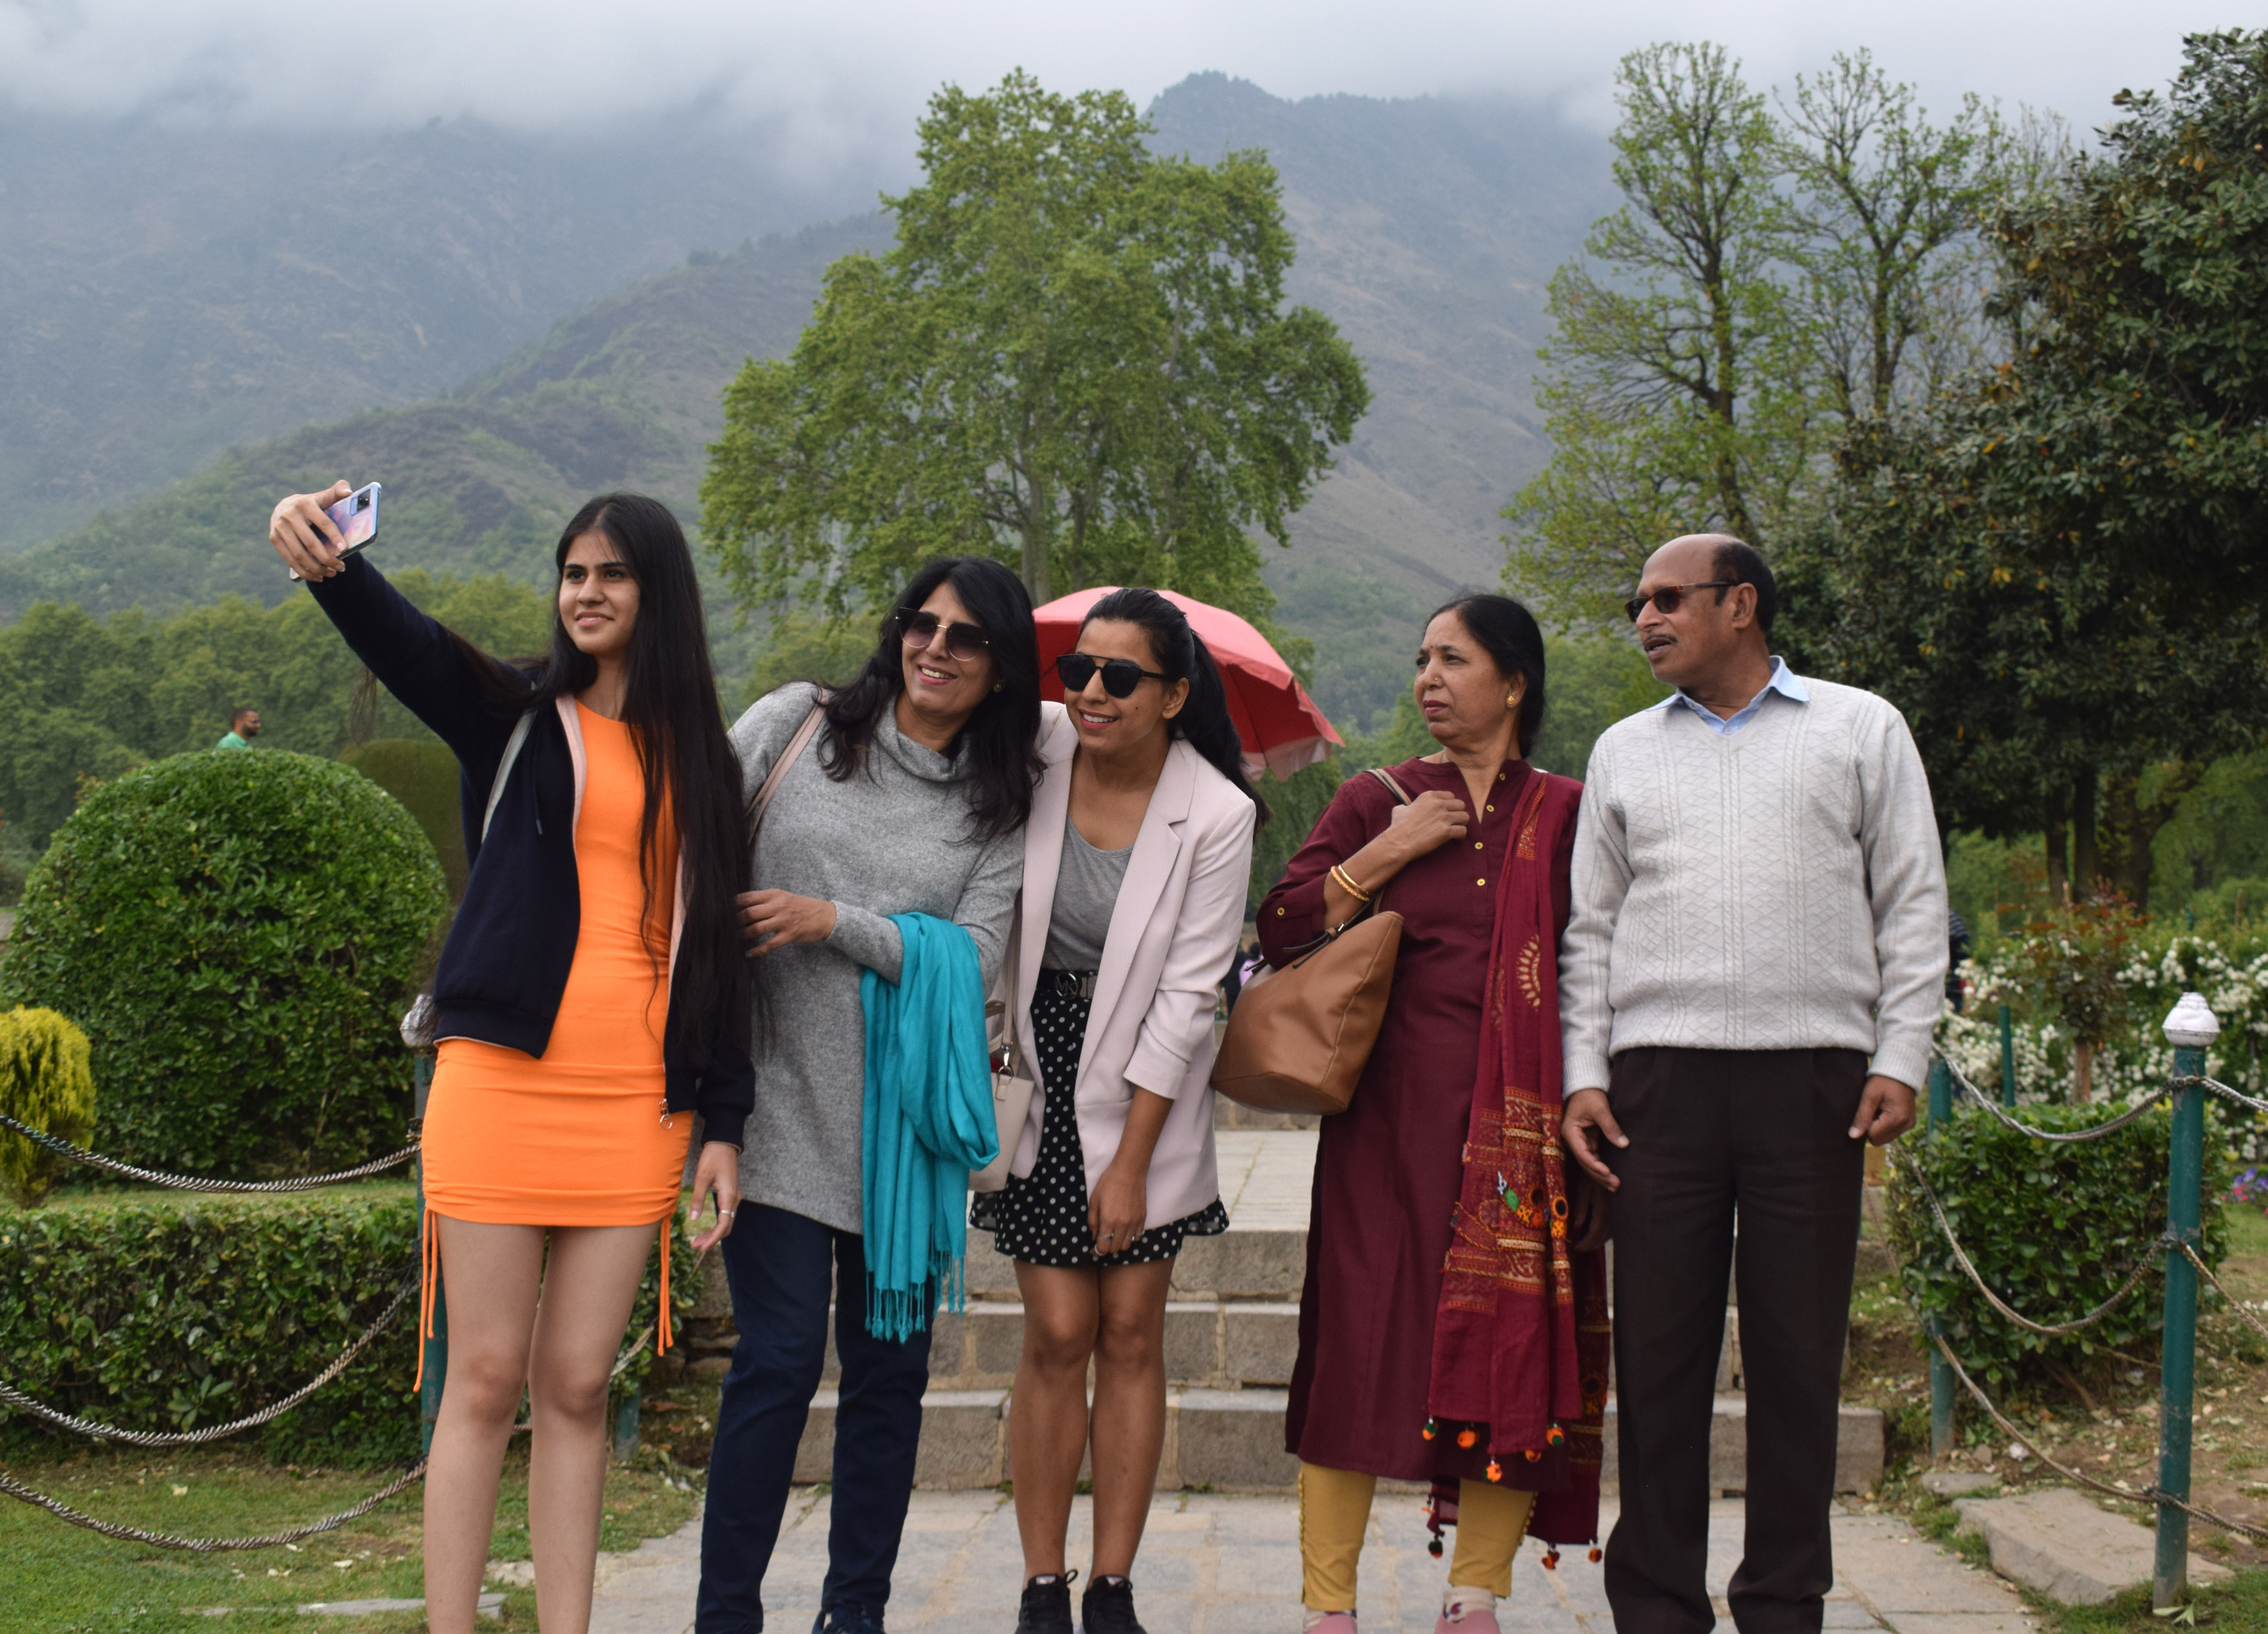 Kashmir Valley has broken all the previous records of tourist arrivals in the last three months